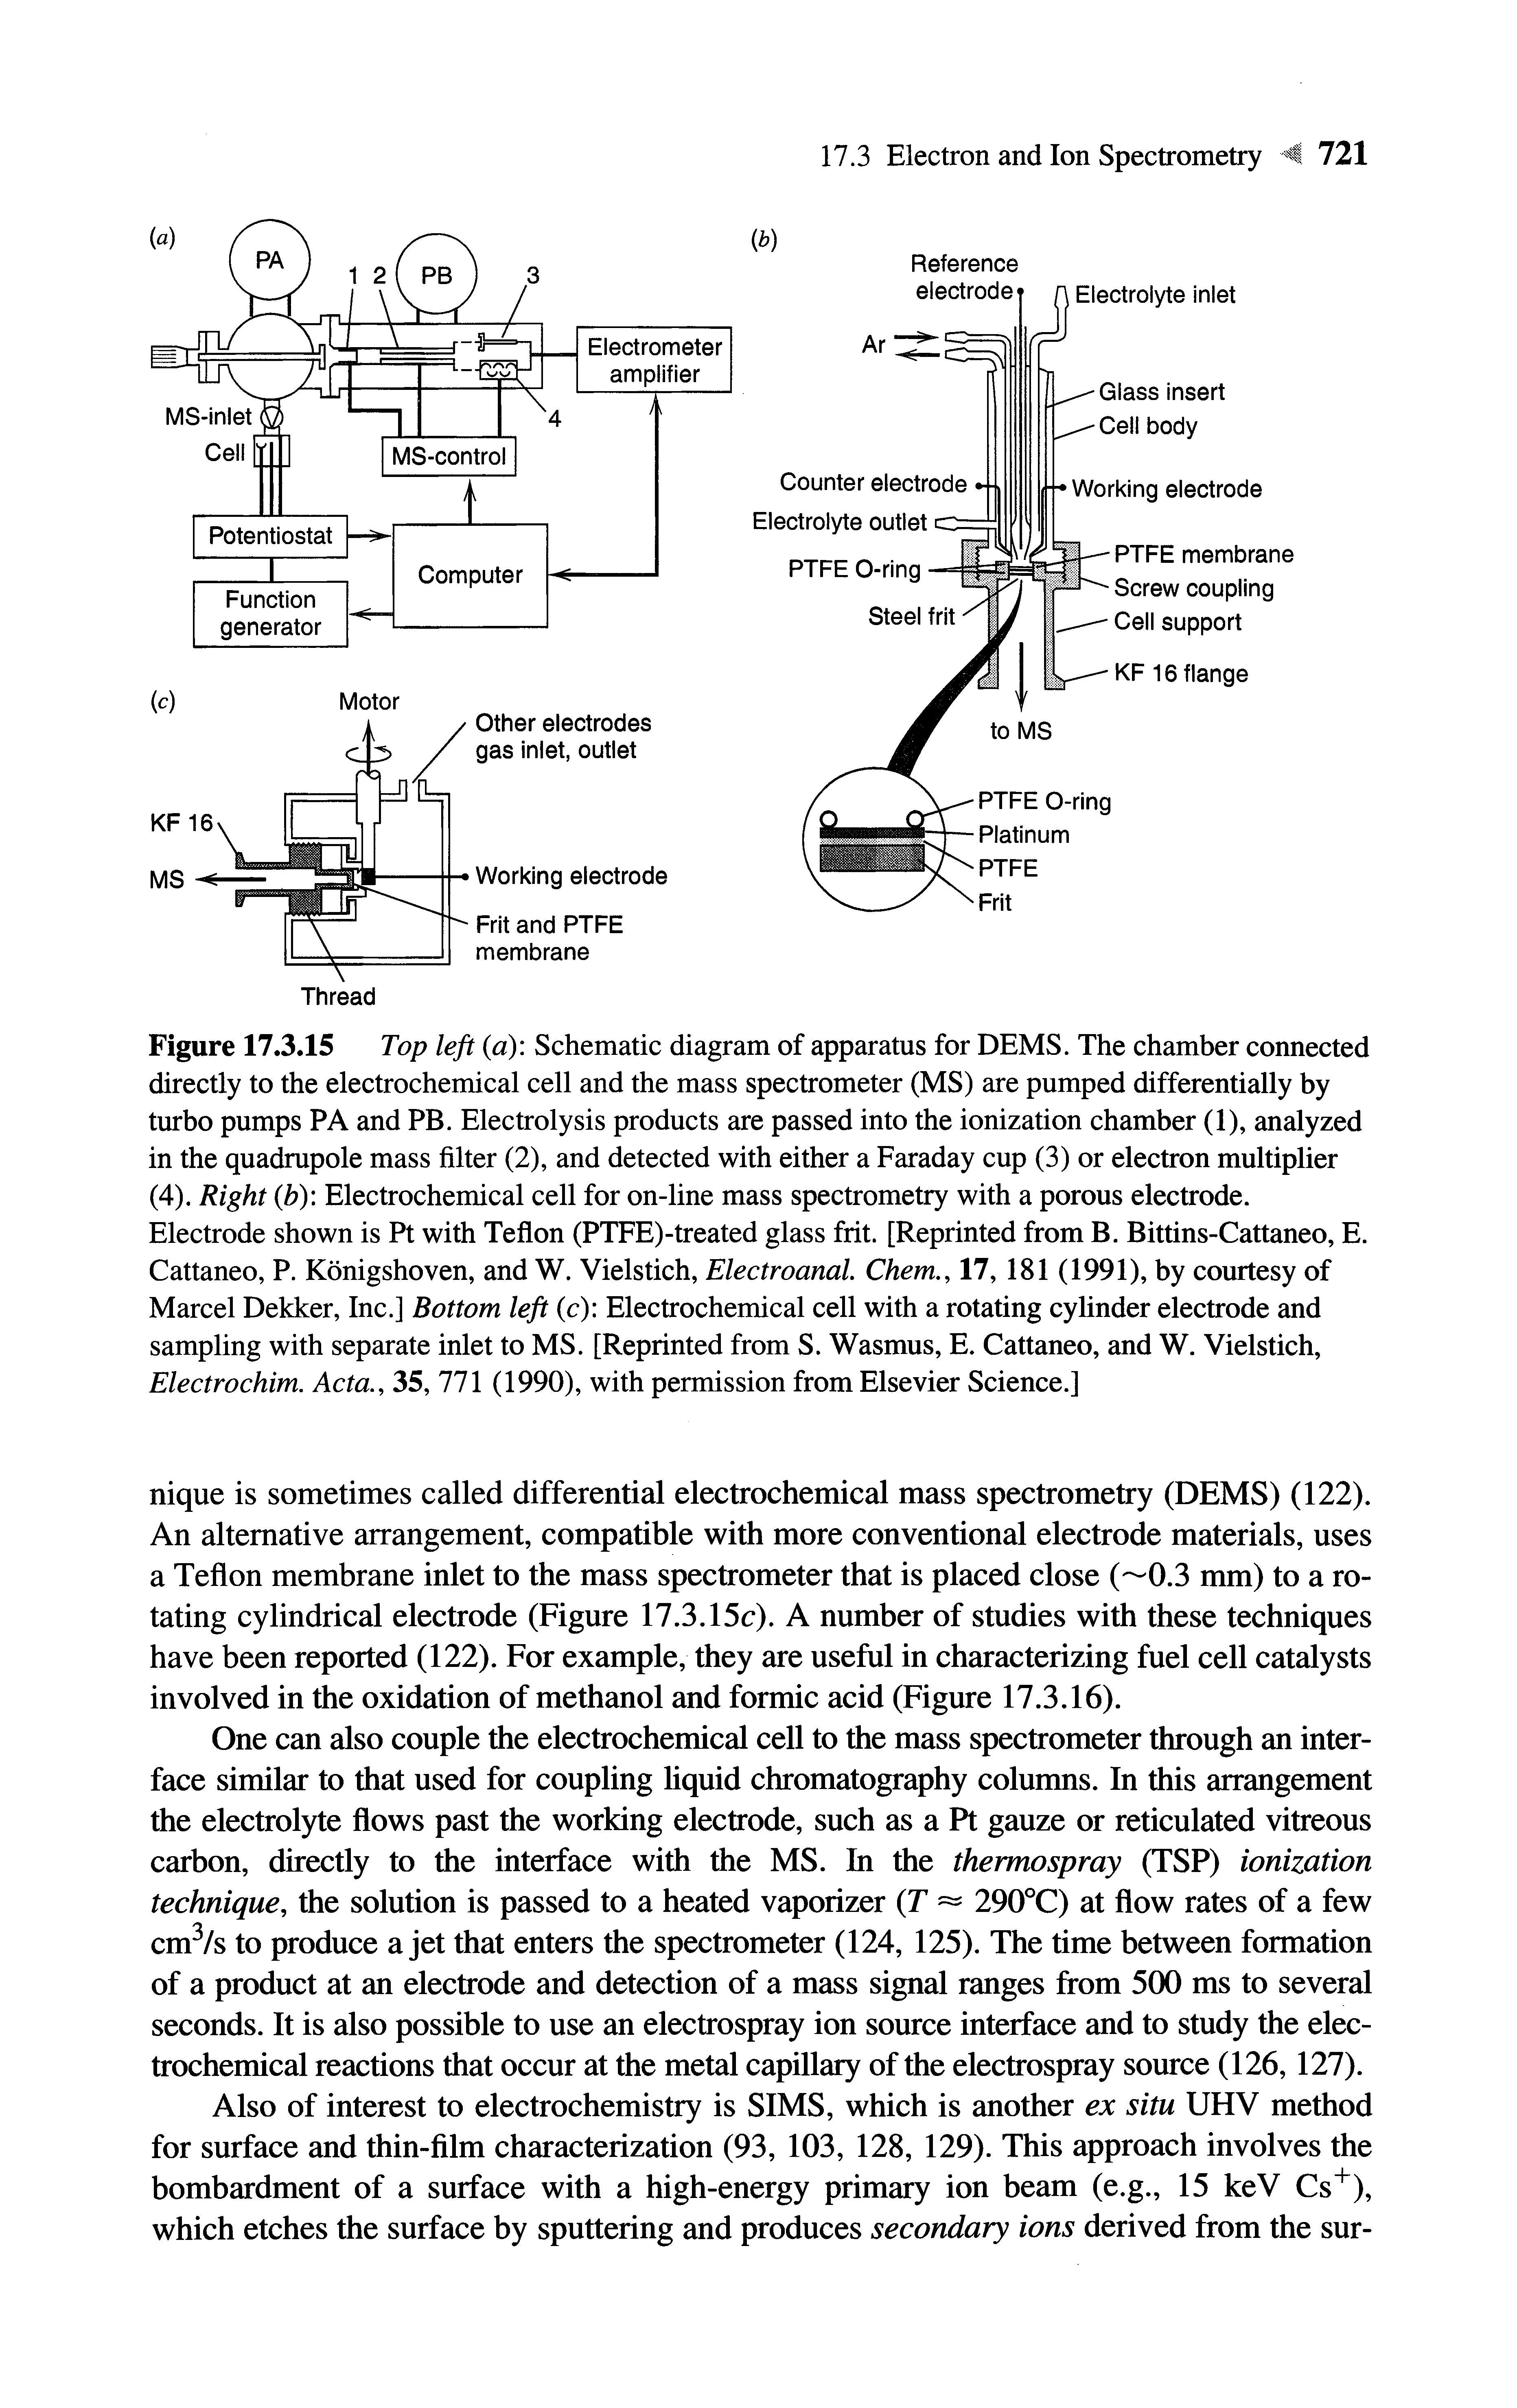 Figure 17.3.15 Top left a) Schematic diagram of apparatus for DEMS. The chamber connected directly to the electrochemical cell and the mass spectrometer (MS) are pumped differentially by turbo pumps PA and PB. Electrolysis products are passed into the ionization chamber (1), analyzed in the quadrupole mass filter (2), and detected with either a Faraday cup (3) or electron multiplier...